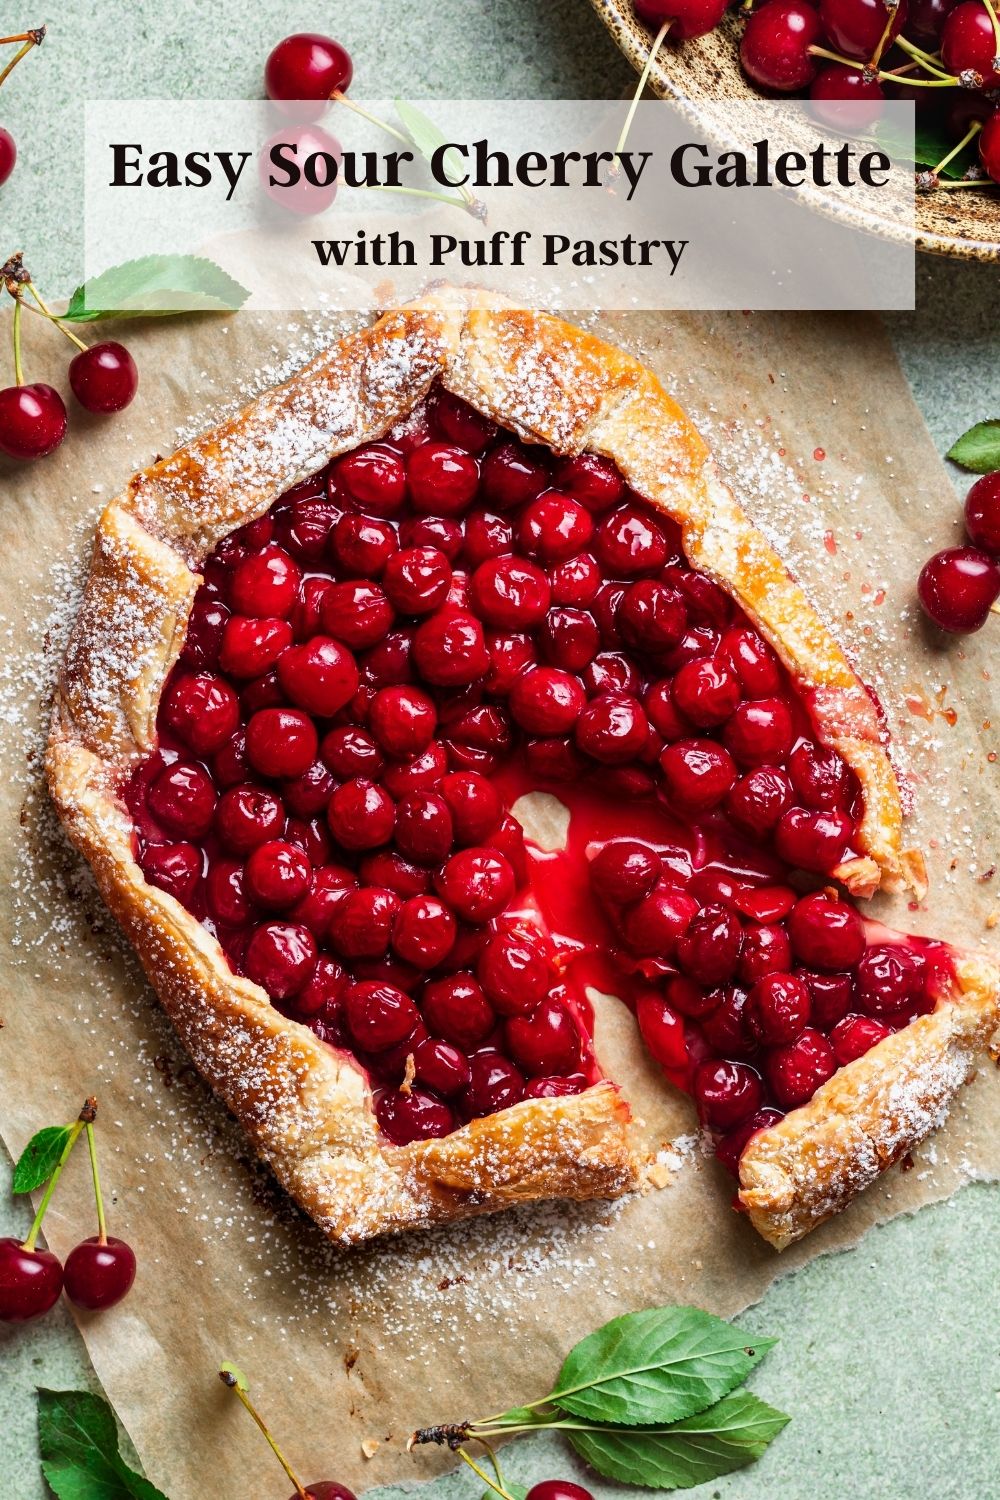 Easy Sour Cherry Galette